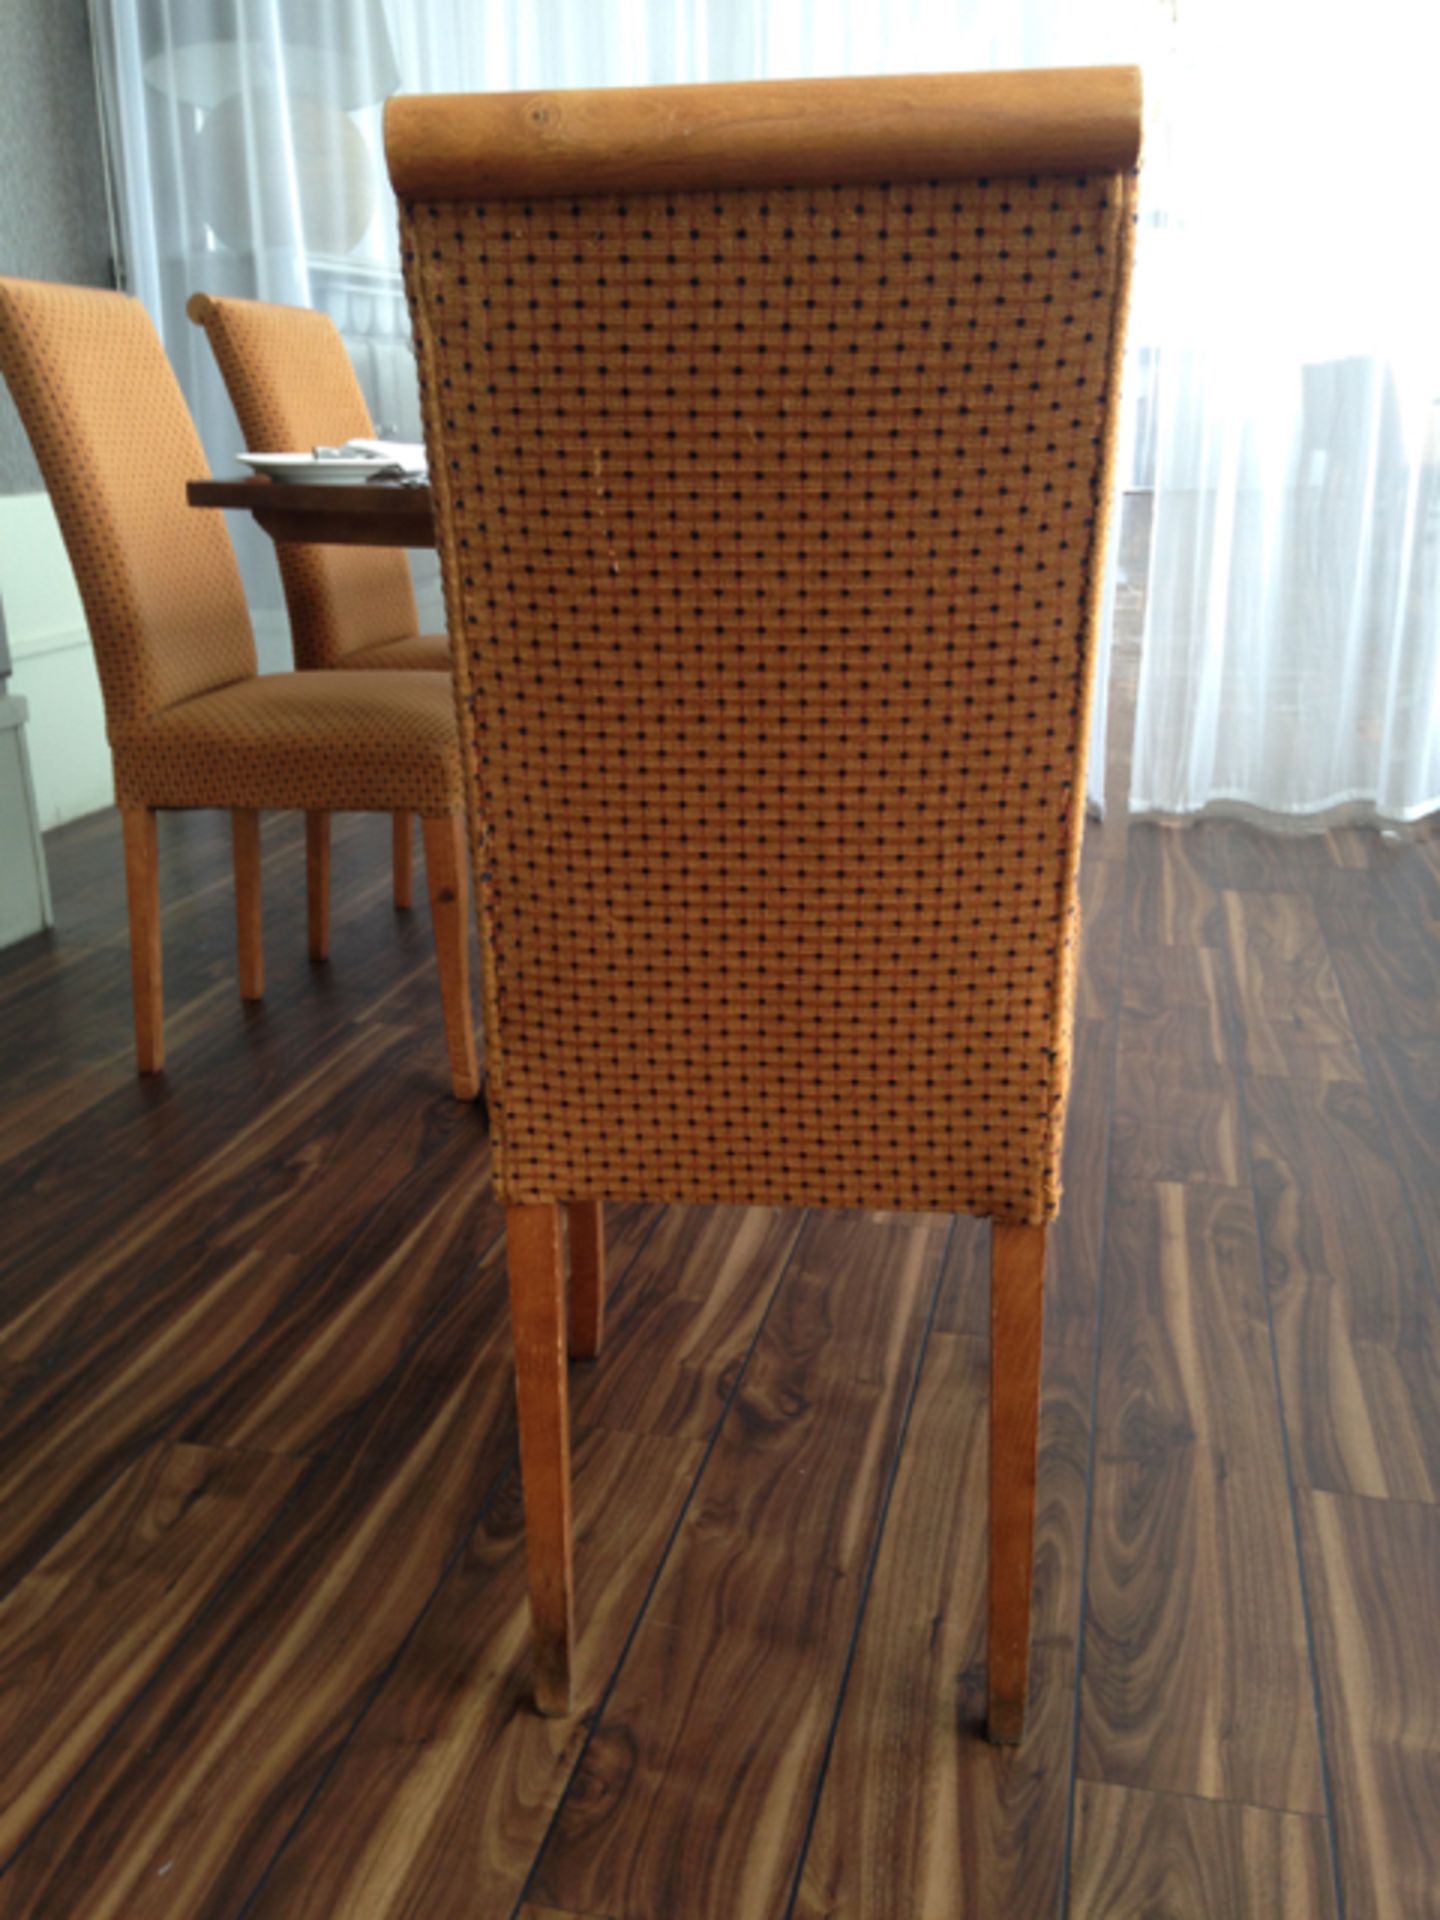 50 x Wooden frame high back dining chairs. - Image 3 of 3